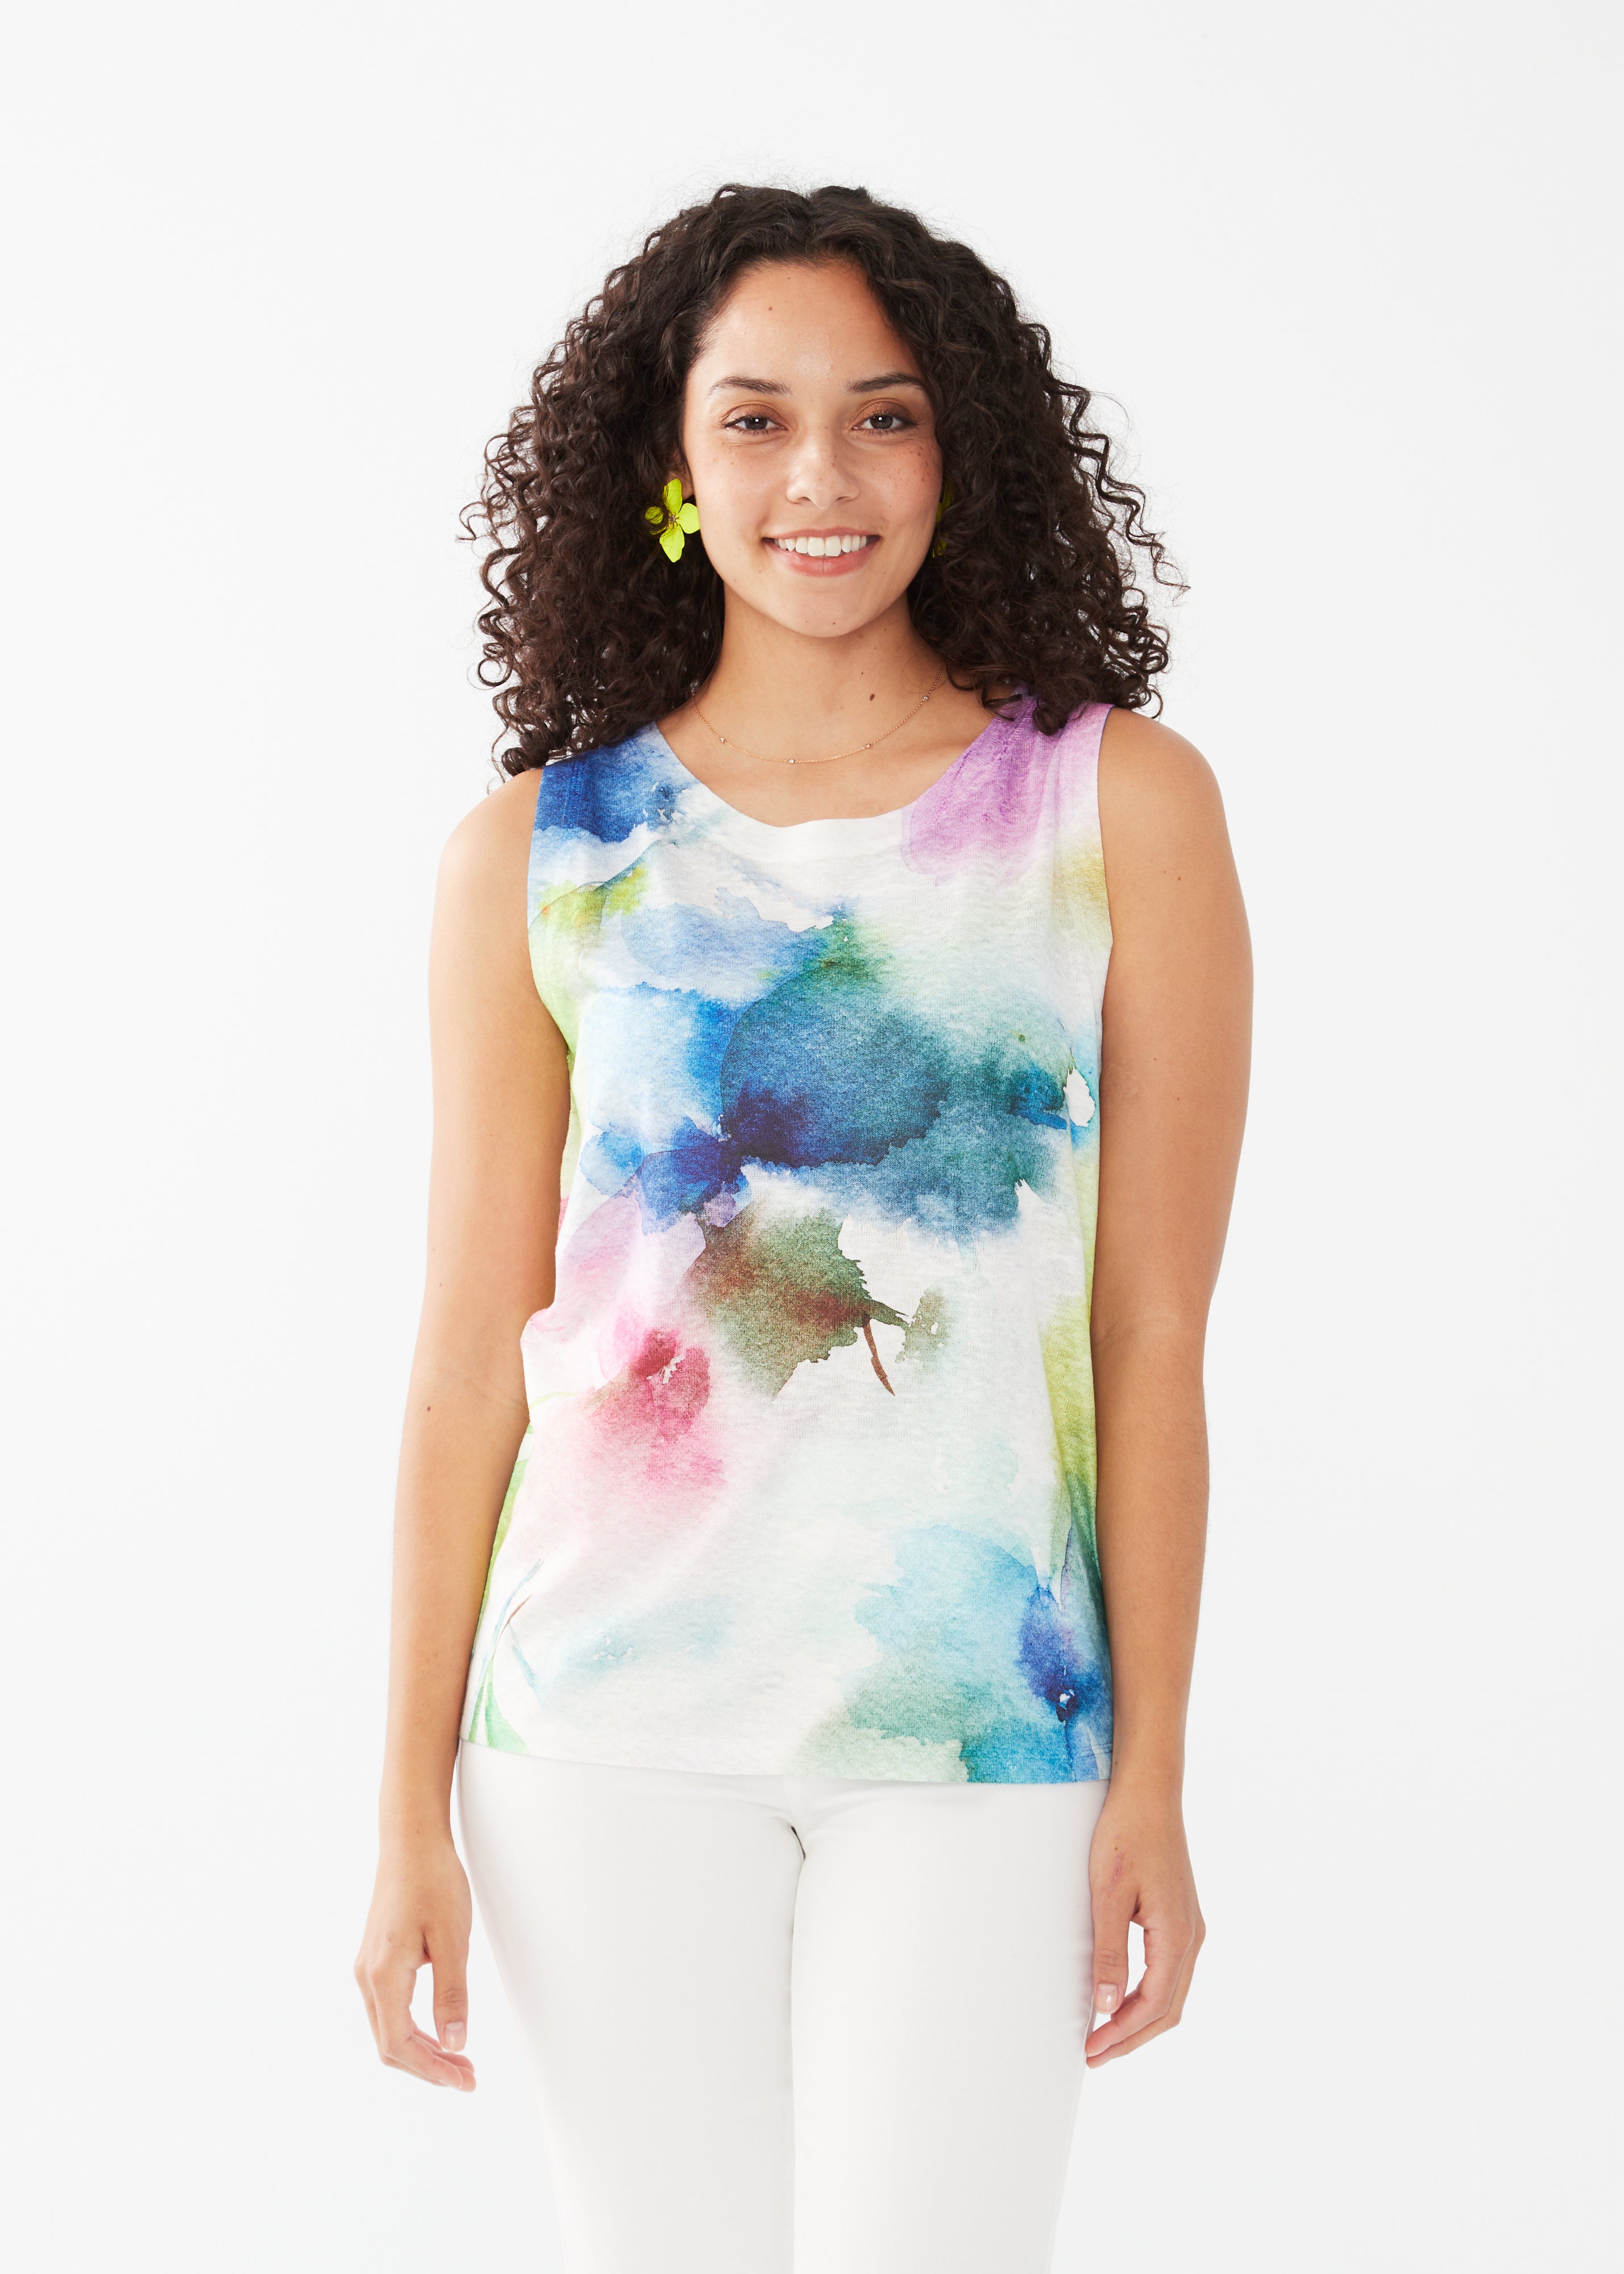 Add a splash of colour to your wardrobe with our FDJ Sleeveless Top! The watercolour design is sure to turn heads, and the gorgeous shades pair perfectly with any denim. Say goodbye to boring tops and hello to style with this denim-friendly piece!